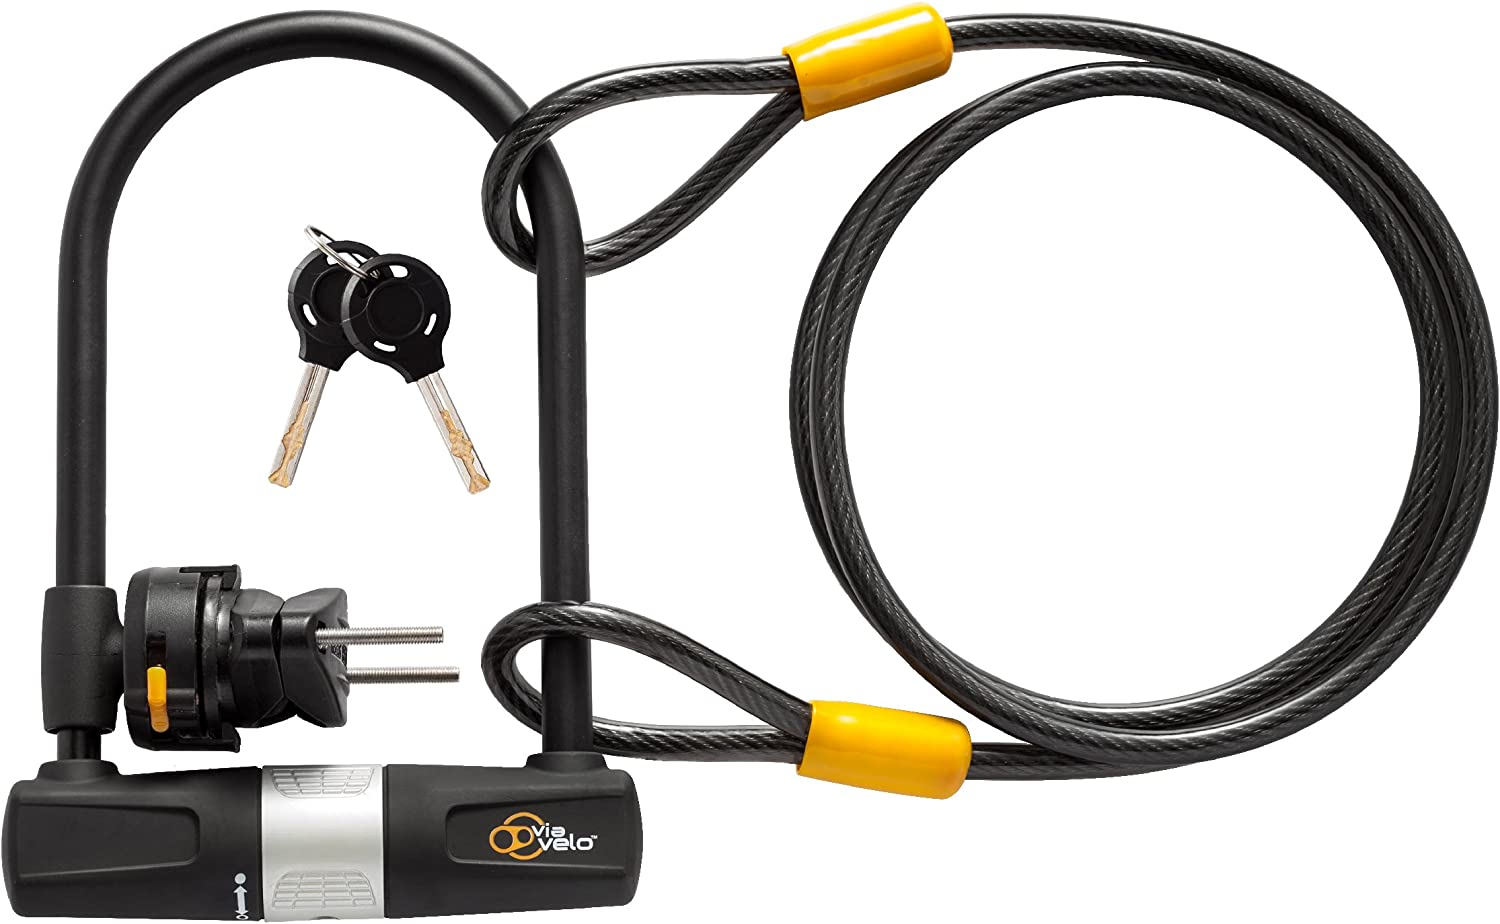 Via Velo Heavy Duty Bicycle U-Lock with Cable